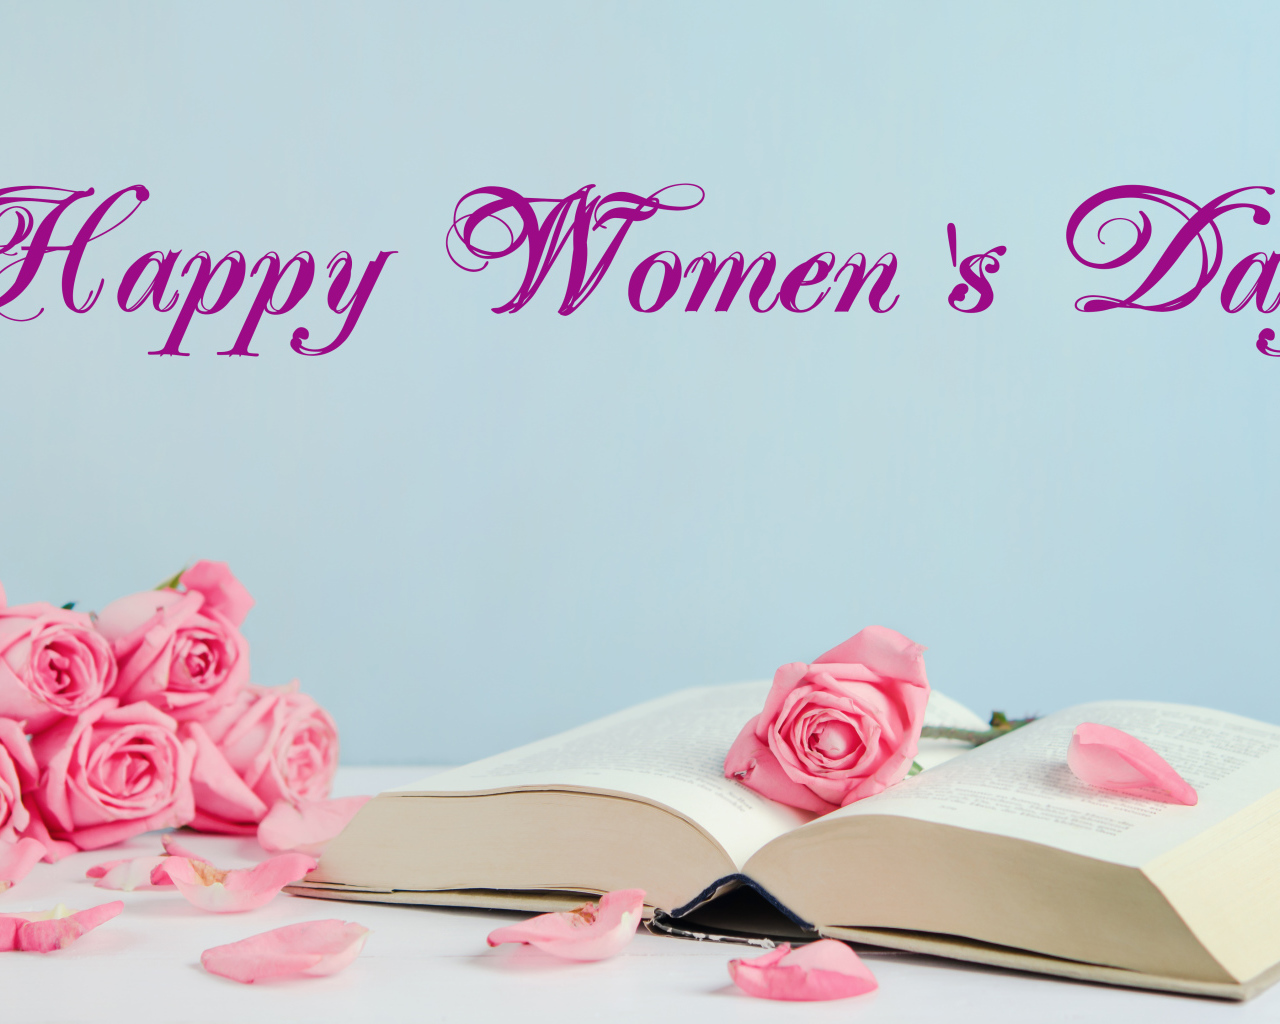 Open book and pink roses for International Women's Day